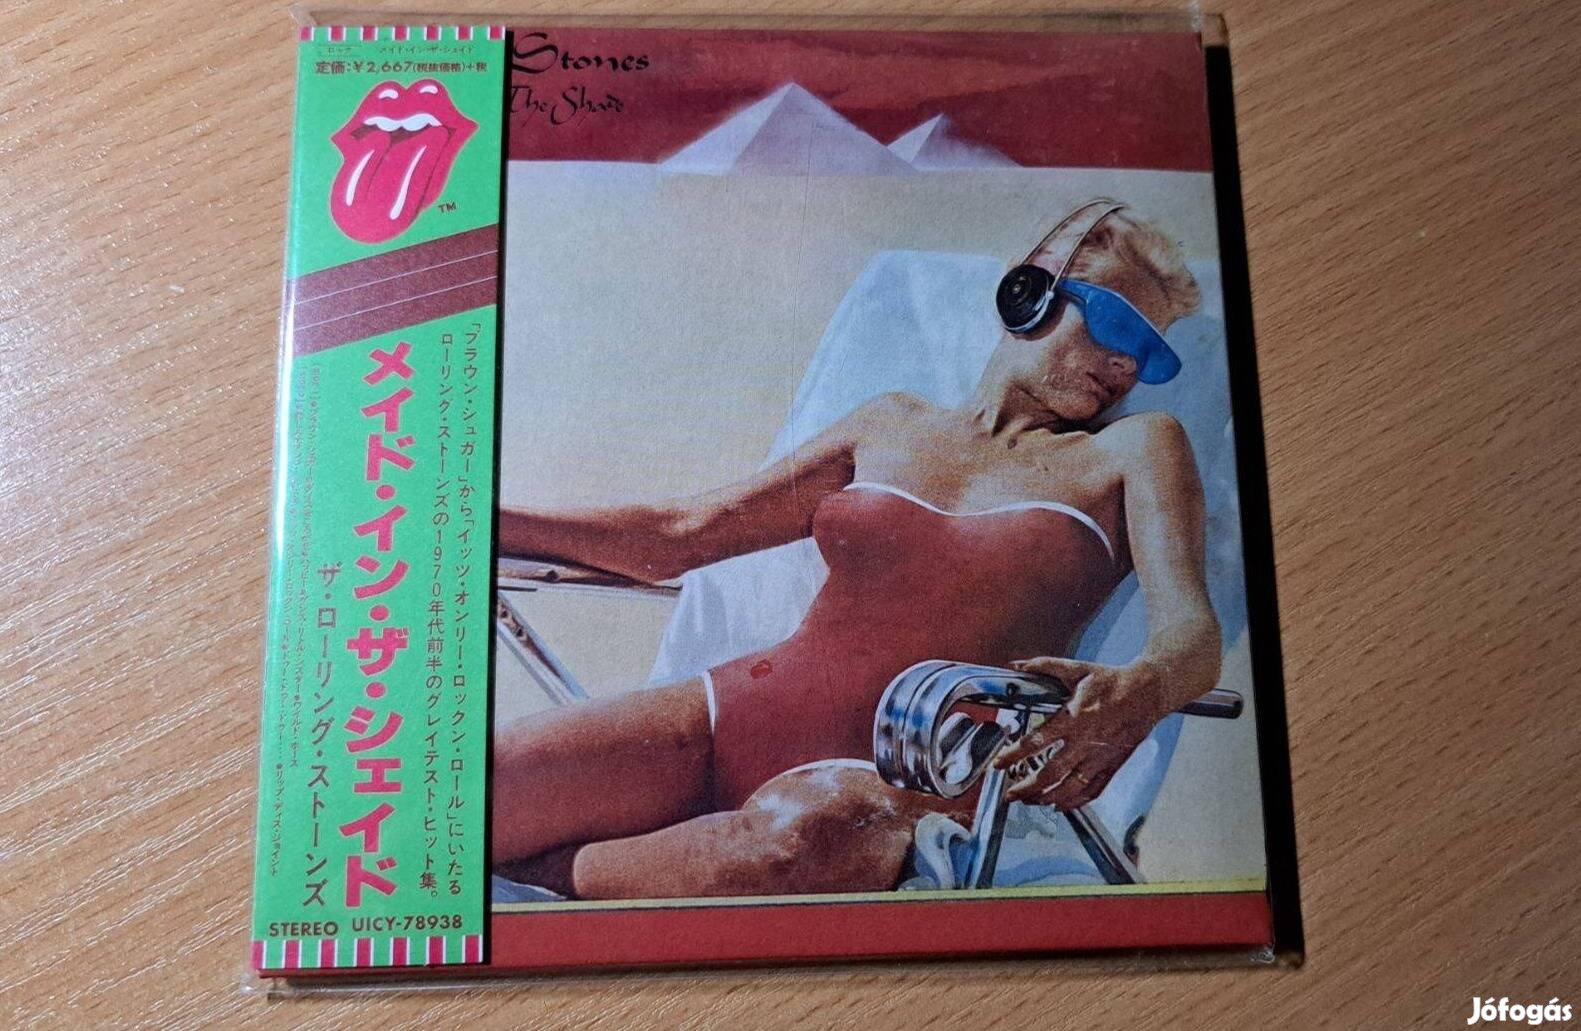 Rolling Stones - Made in the Shade - CD